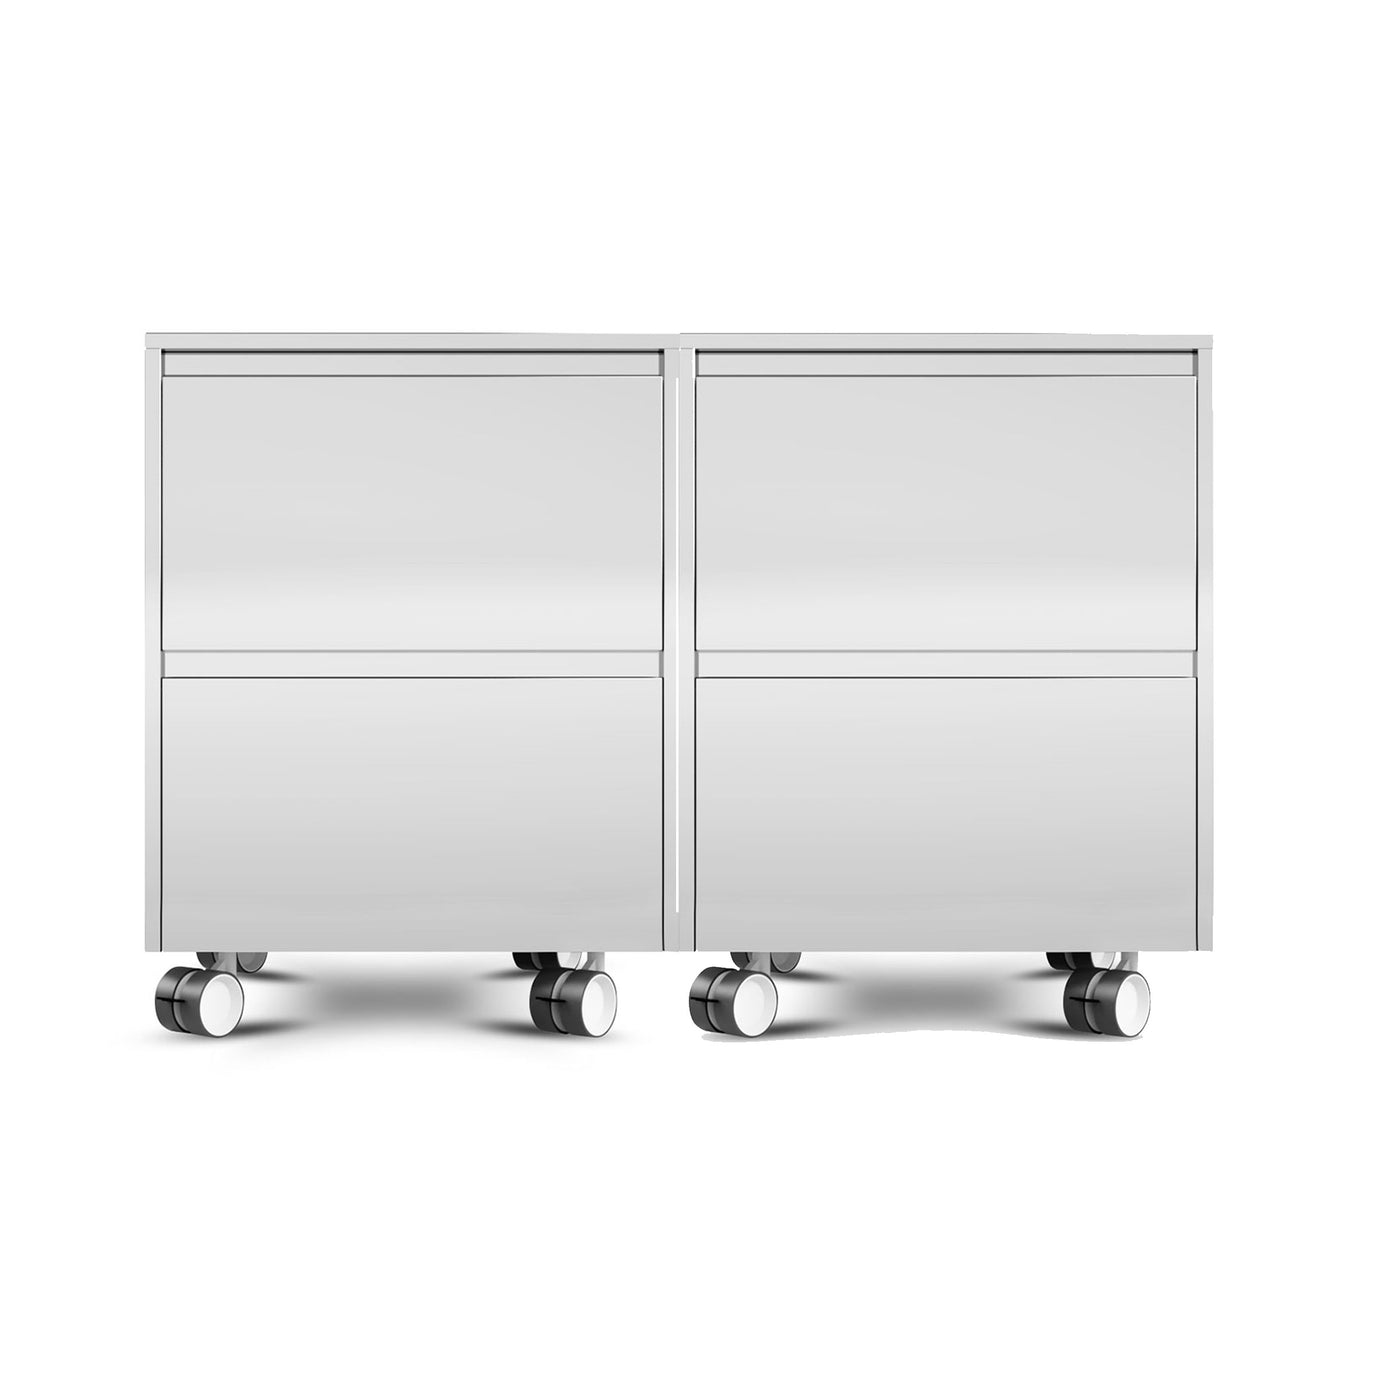 Modular Outdoor Stainless Steel Kitchen GIUDECCA Two Drawers by LISA 06